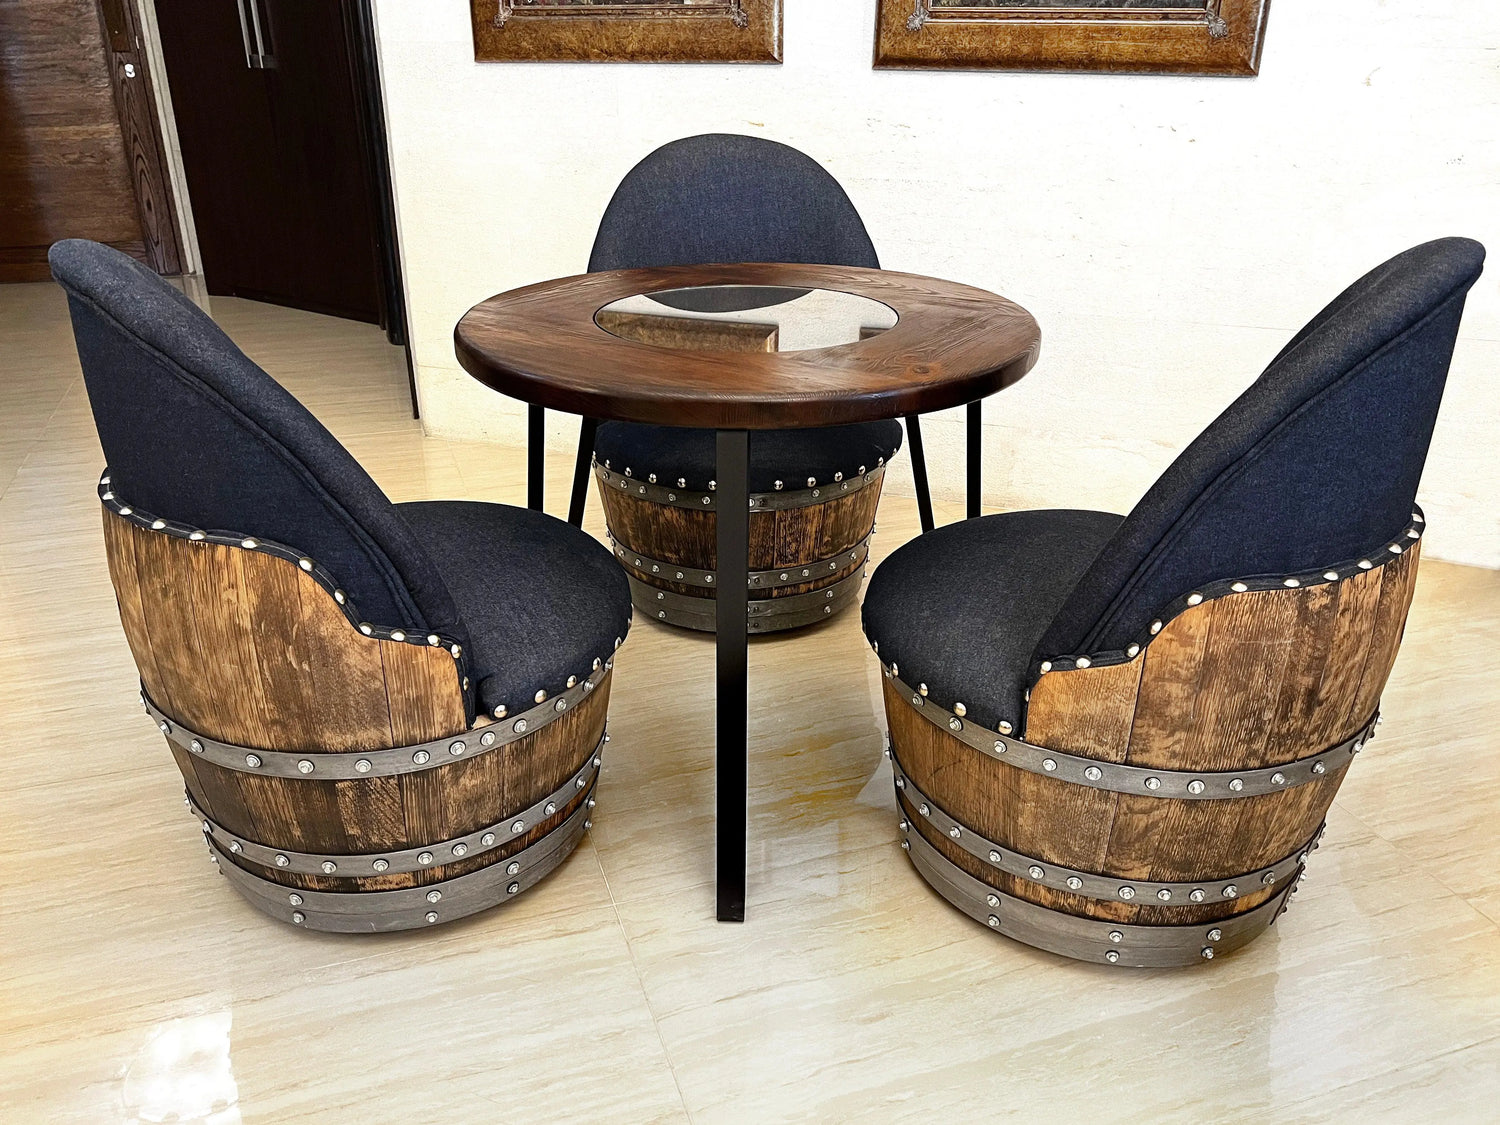 Protect your wine barrel furniture against mites, humidity and mold - Oak Wood Wine Barrels